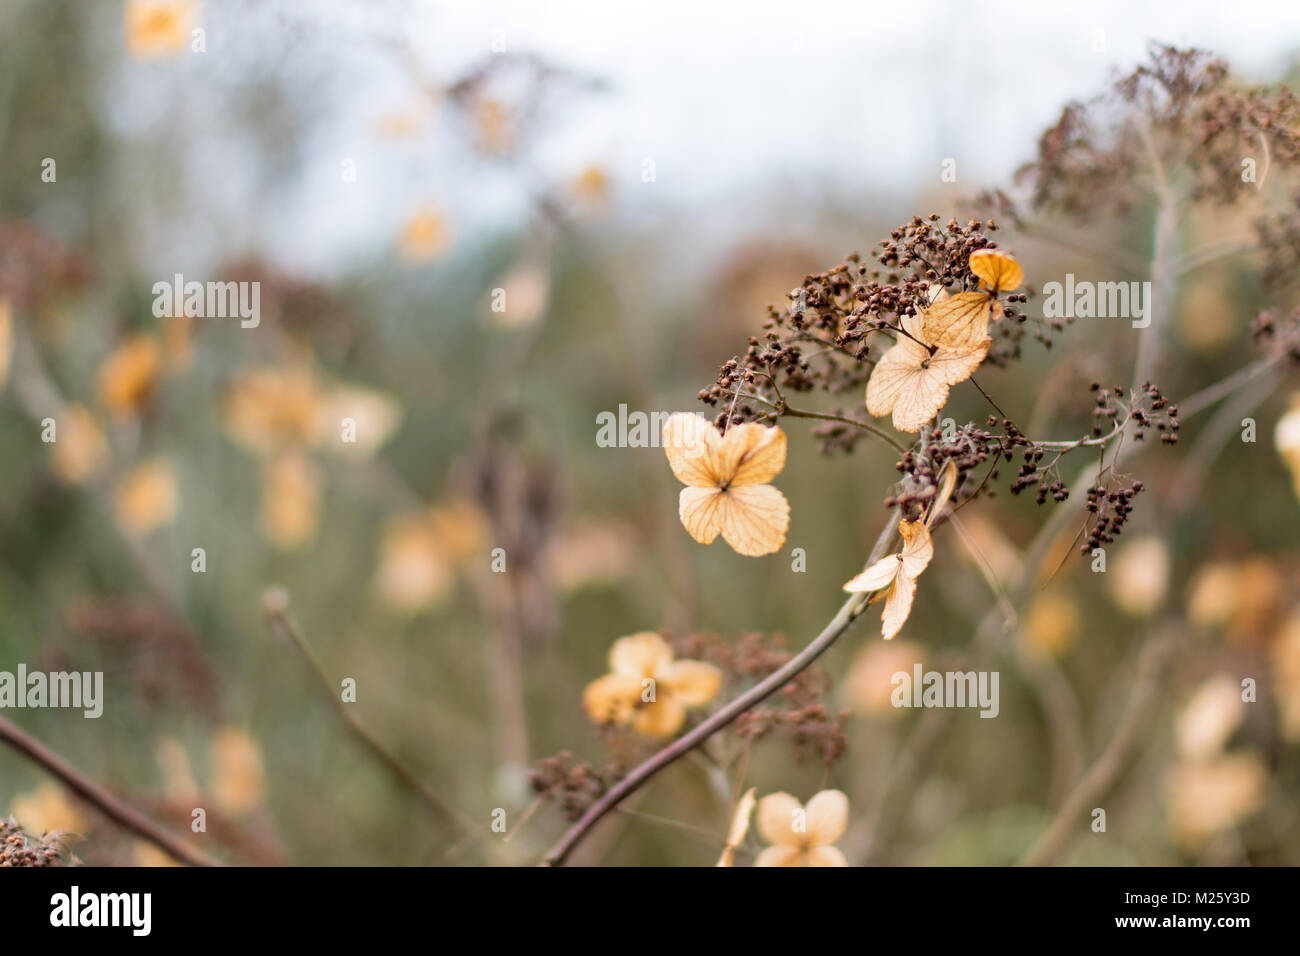 Dried hydrangea flowers in winter, Sussex, England Stock Photo